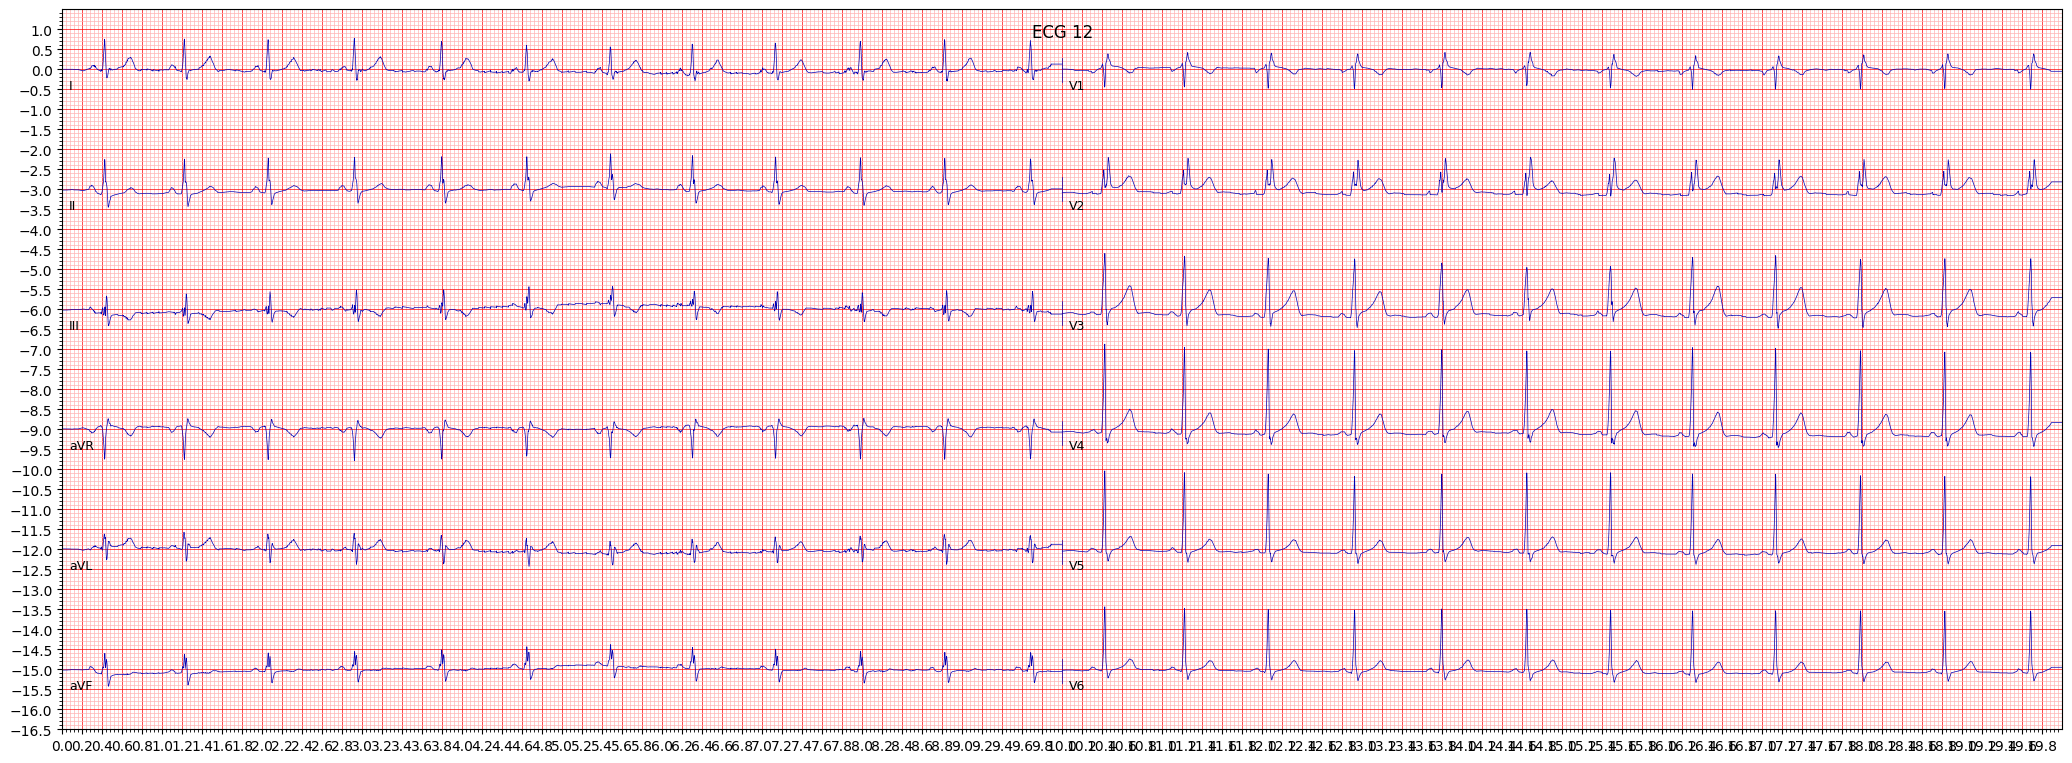 incomplete right bundle branch block (IRBBB) example 588